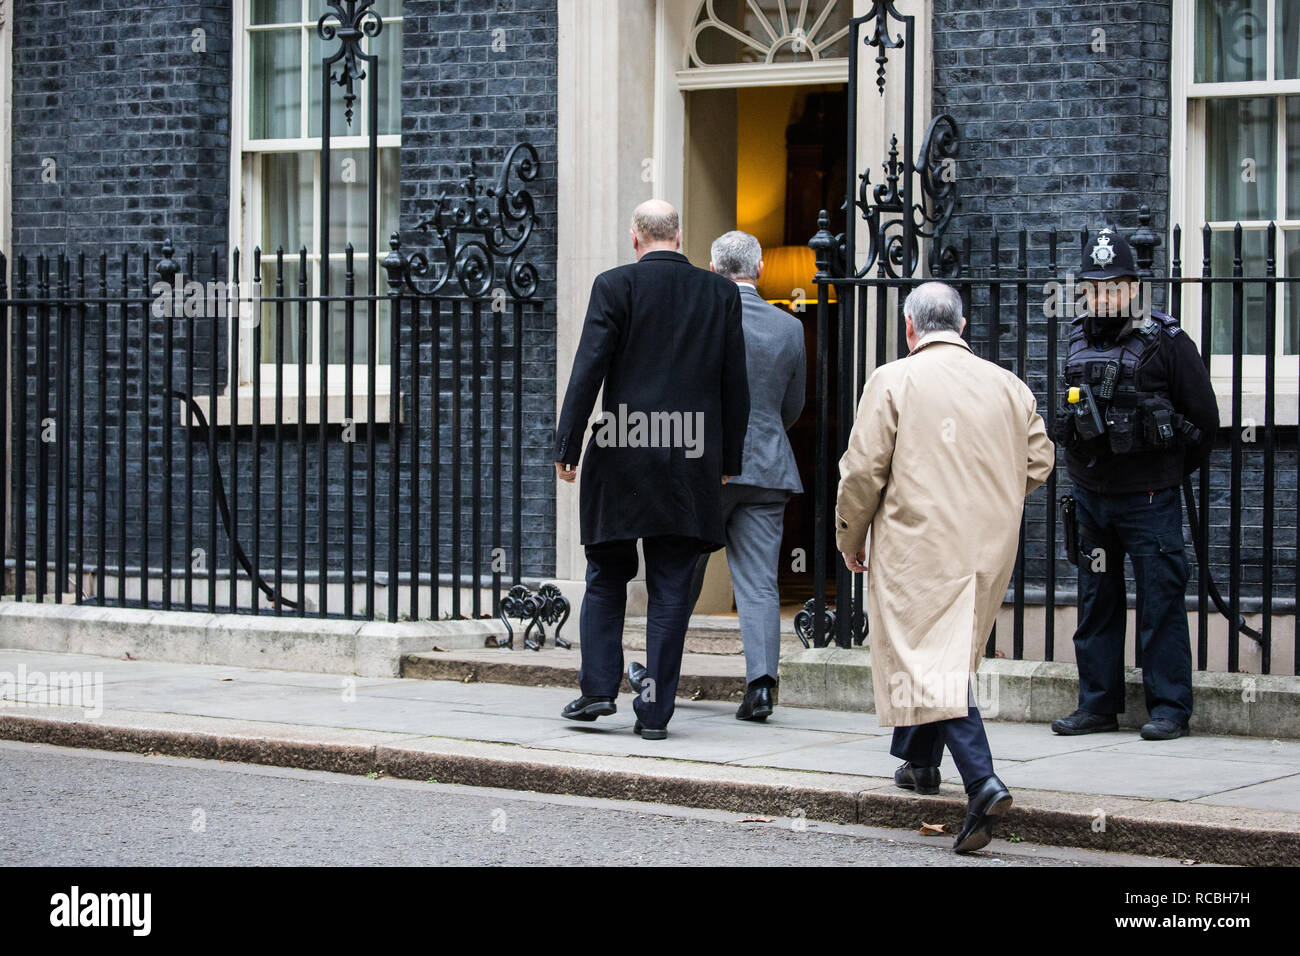 London, UK. 15th Jan, 2019. Chris Grayling MP, Secretary of State for Transport, Stephen Barclay MP, Secretary of State for Exiting the European Union, and Geoffrey Cox QC MP, Attorney General, arrive at 10 Downing Street for a Cabinet meeting on the day of the vote in the House of Commons on Prime Minister Theresa May's proposed final Brexit withdrawal agreement. Credit: Mark Kerrison/Alamy Live News Stock Photo